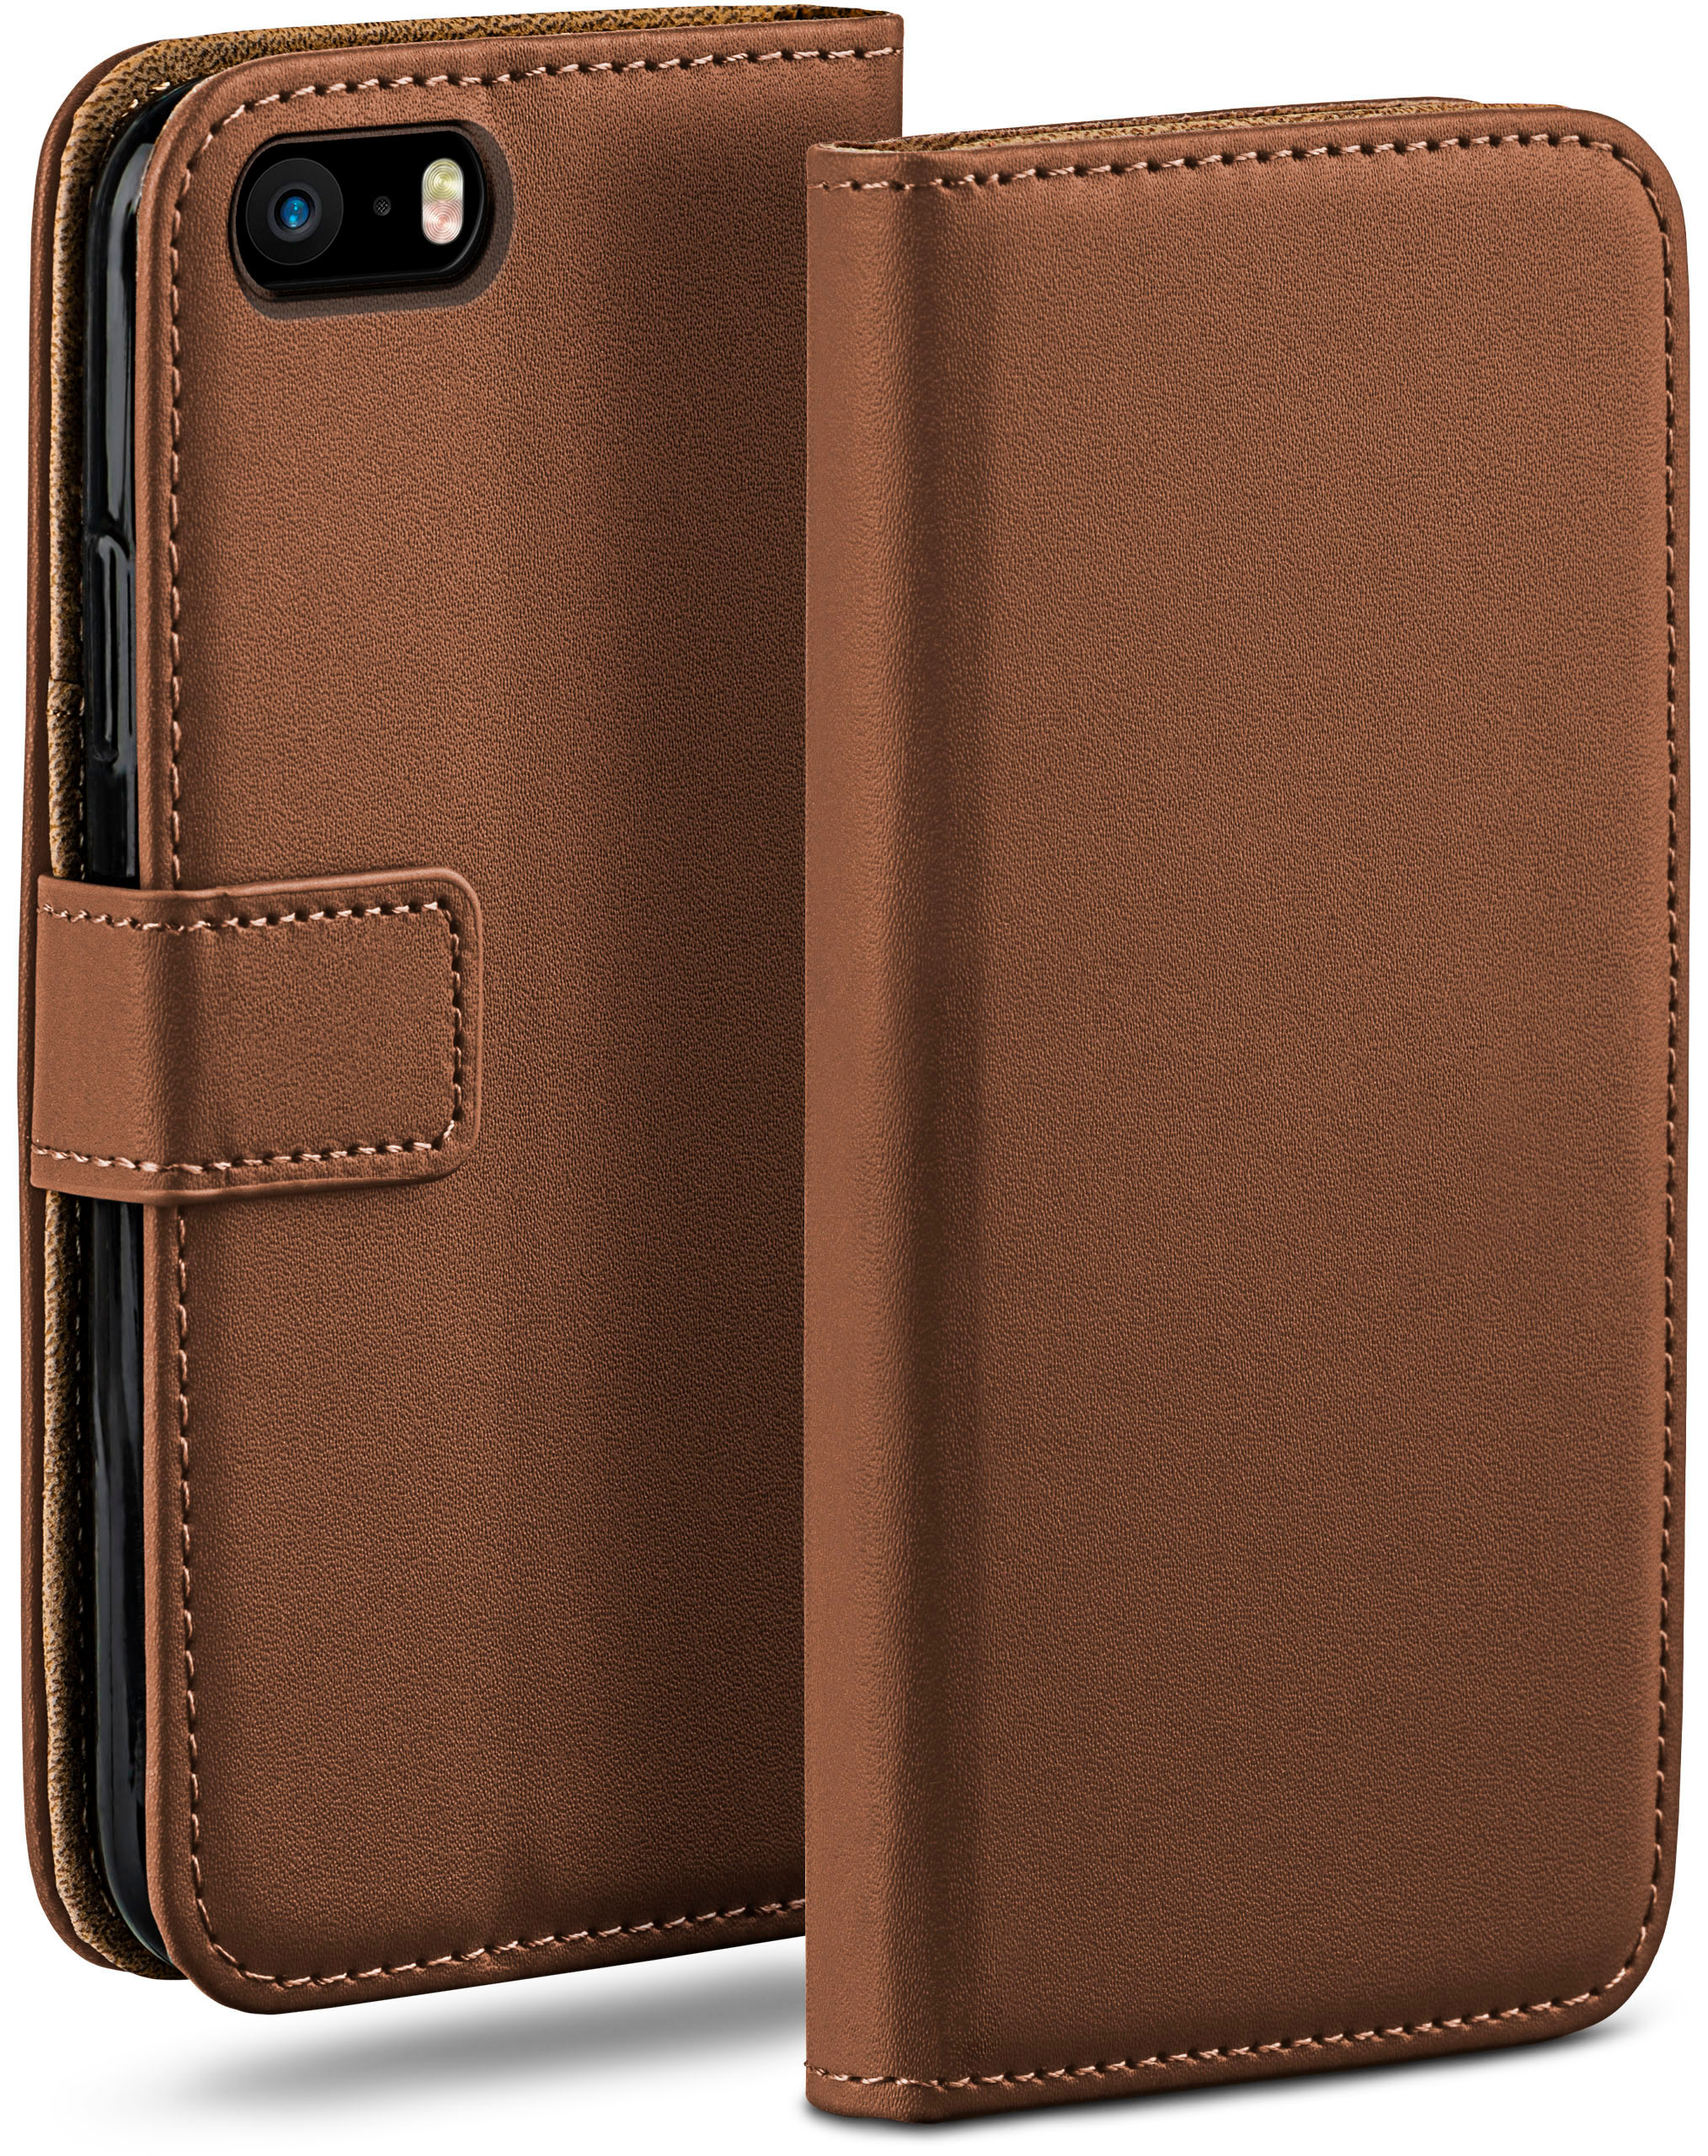 MOEX Book SE / Umber-Brown (2016), Apple, 5s 5 / Bookcover, Case, iPhone